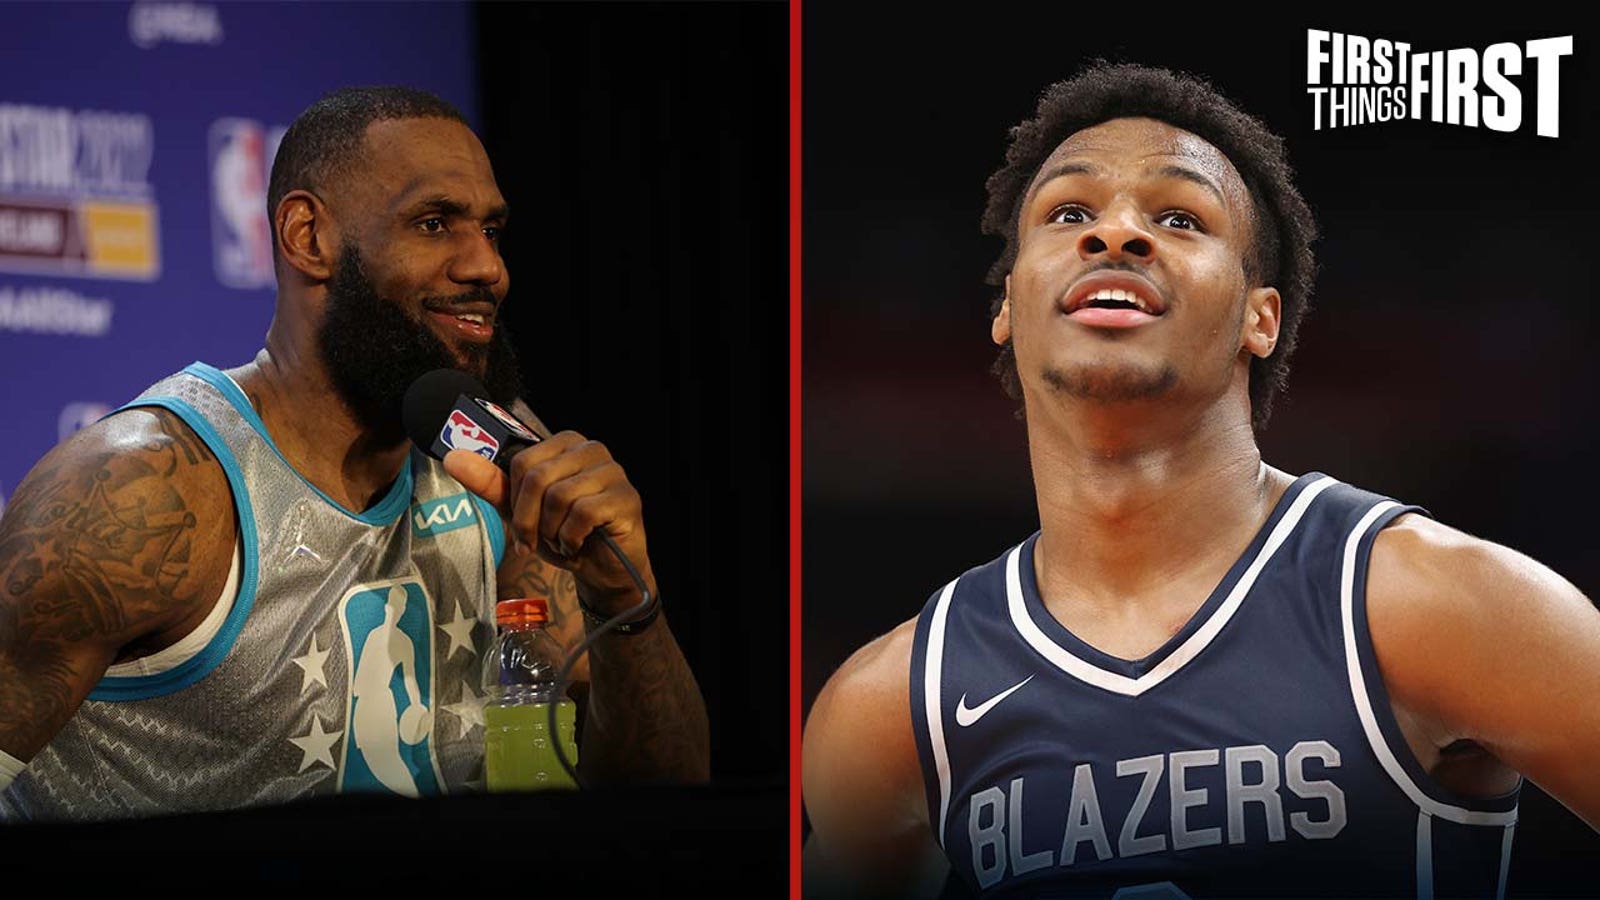 LeBron James could be pushing Bronny early